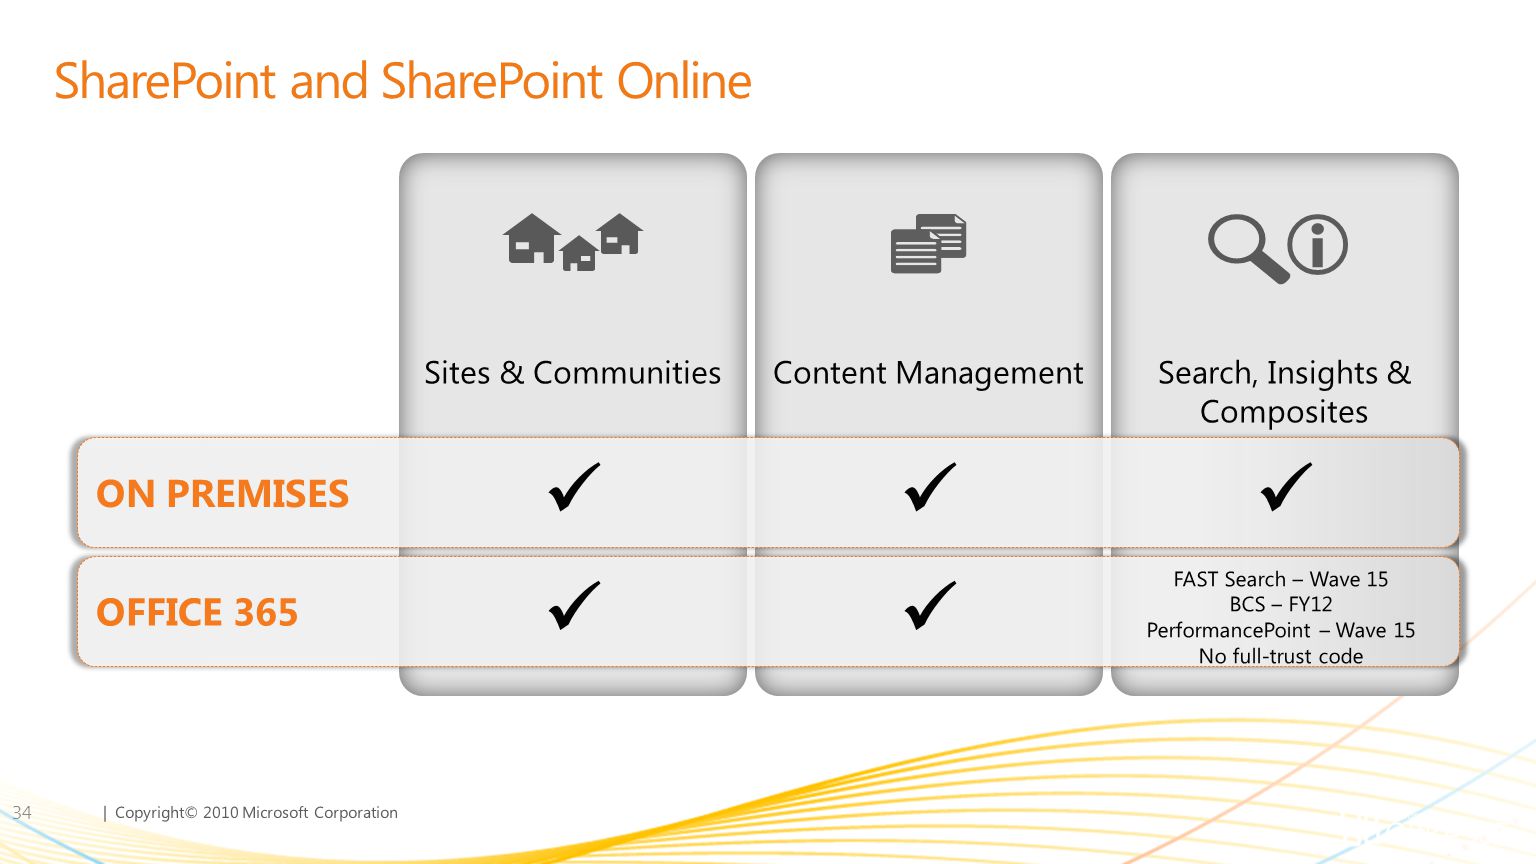 SharePoint and SharePoint Online